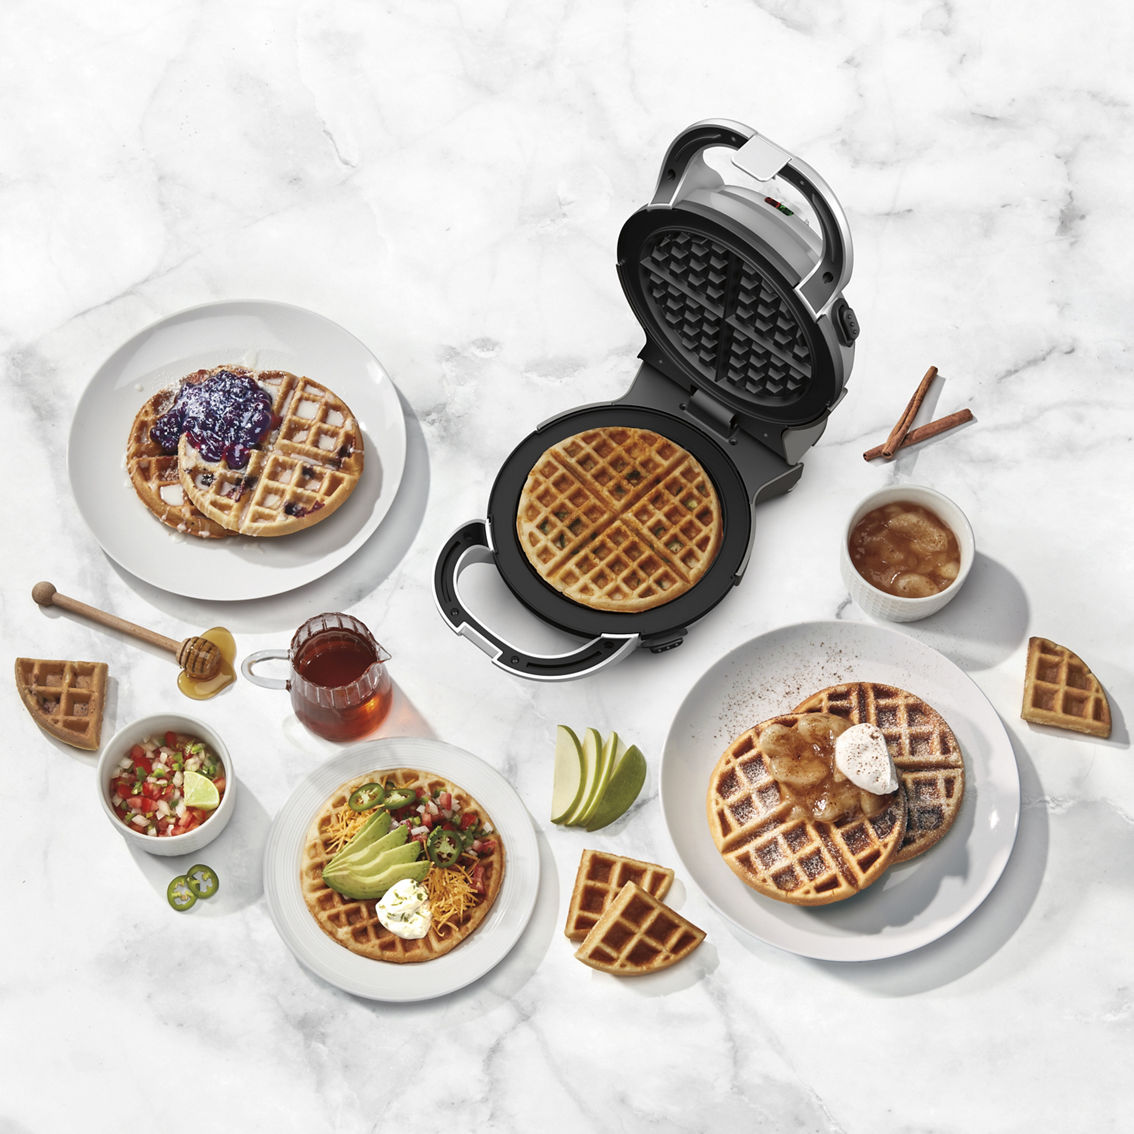 Cuisinart 2-in-1 Waffle Maker with Removable Plates - Image 3 of 3